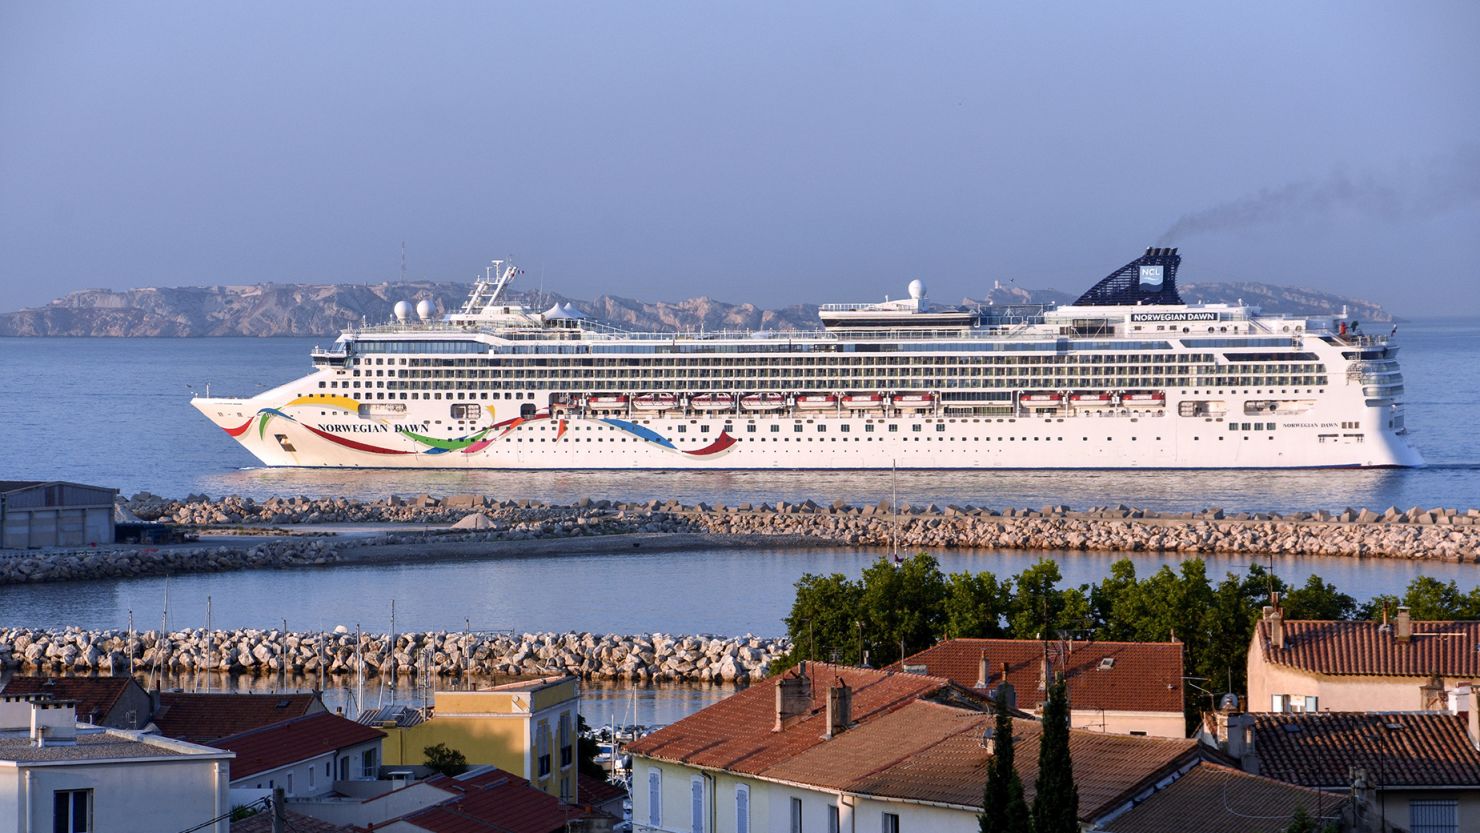 A Norwegian cruise ship arrives in the French Mediterranean port of Marseille in this 2021 file photo.